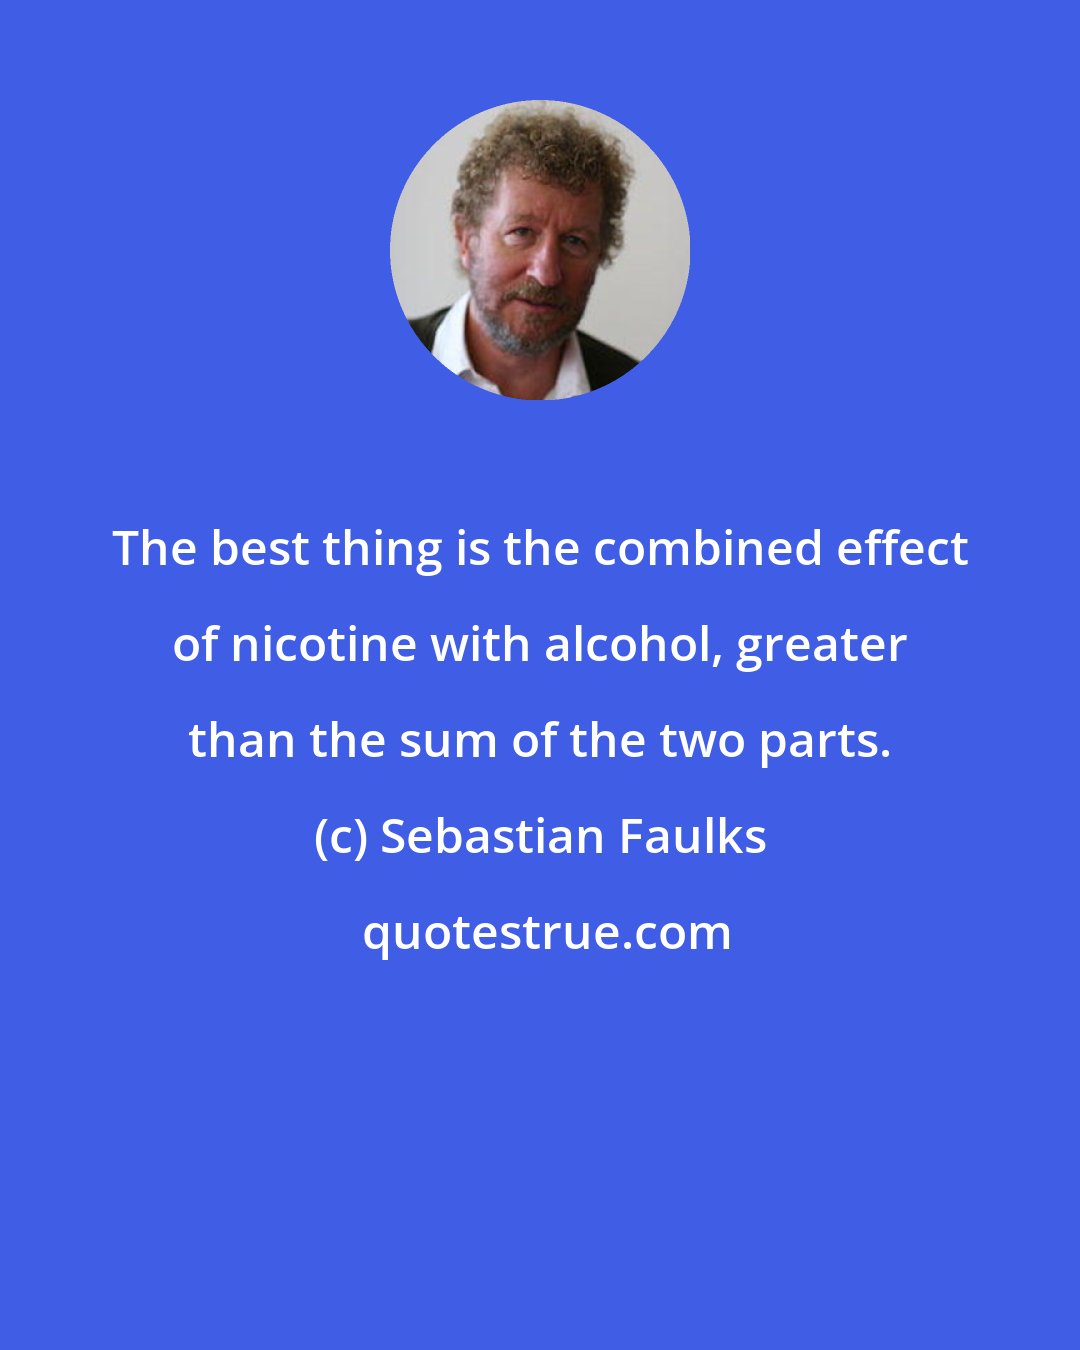 Sebastian Faulks: The best thing is the combined effect of nicotine with alcohol, greater than the sum of the two parts.